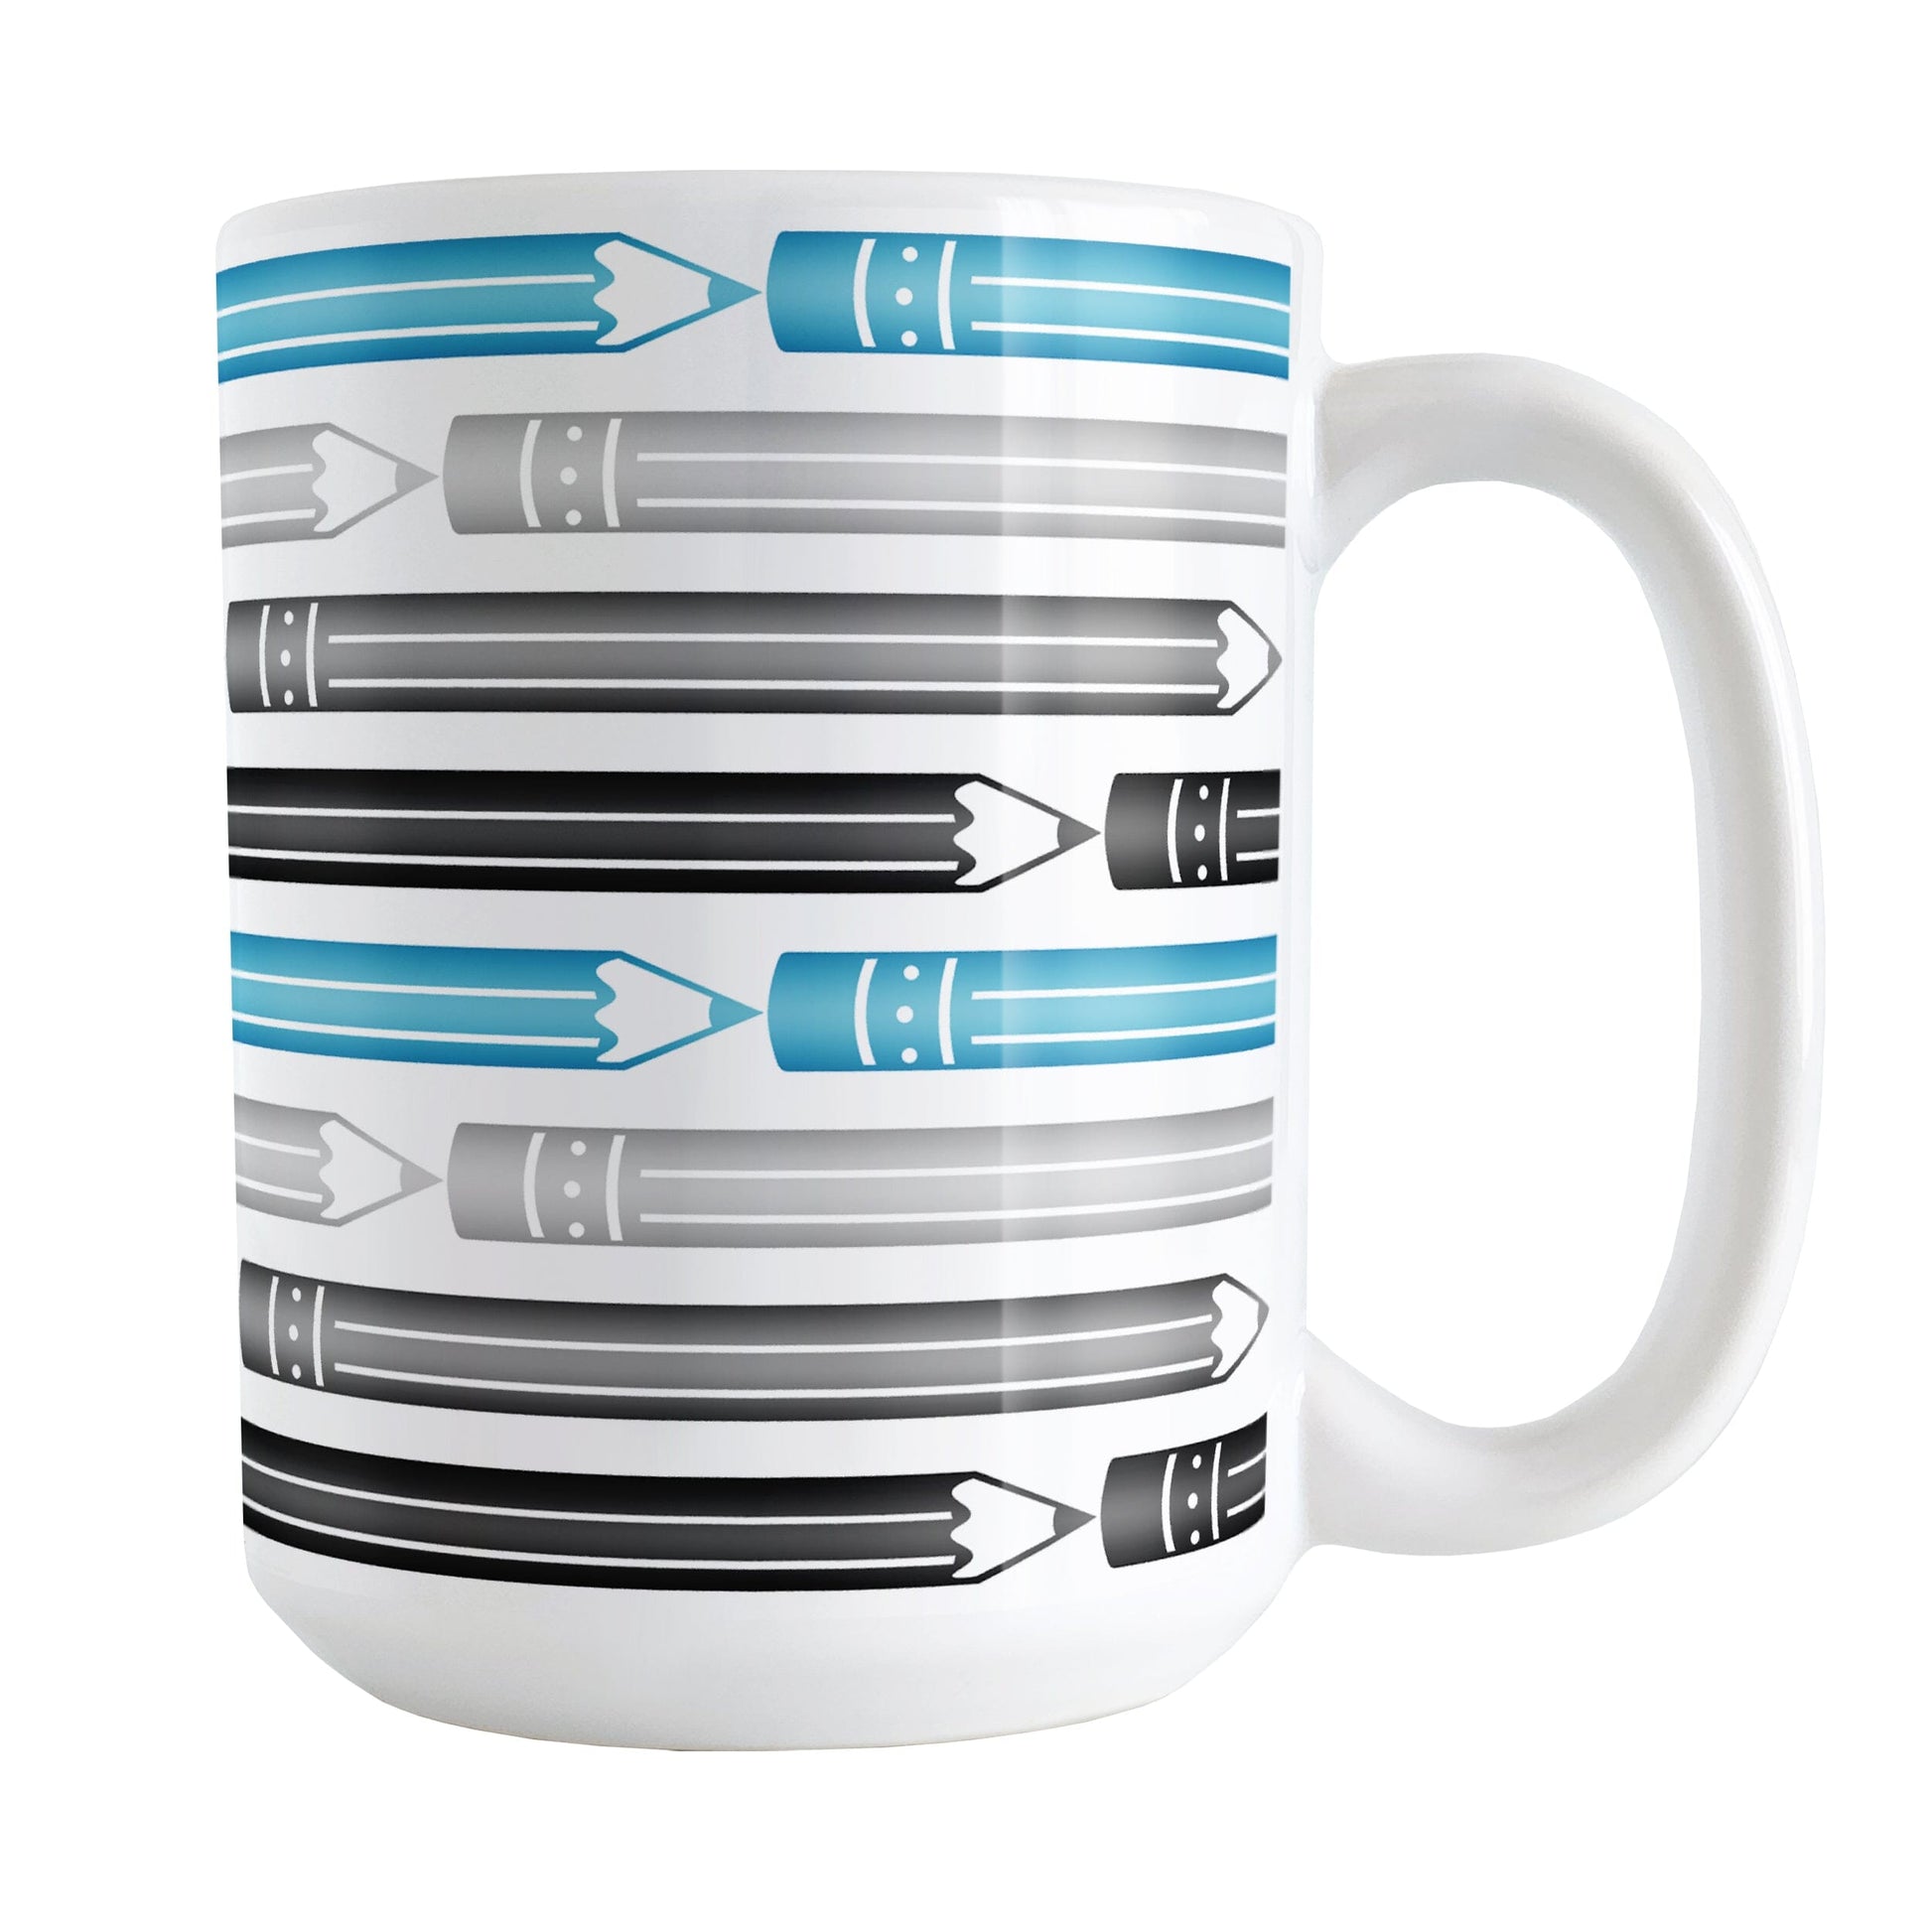 Blue Gray Black Pencils Pattern Mug (15oz) at Amy's Coffee Mugs. A ceramic coffee mug designed with a horizontal pencils in blue, gray, and black, stacked in a pattern that wraps around the mug to the handle.